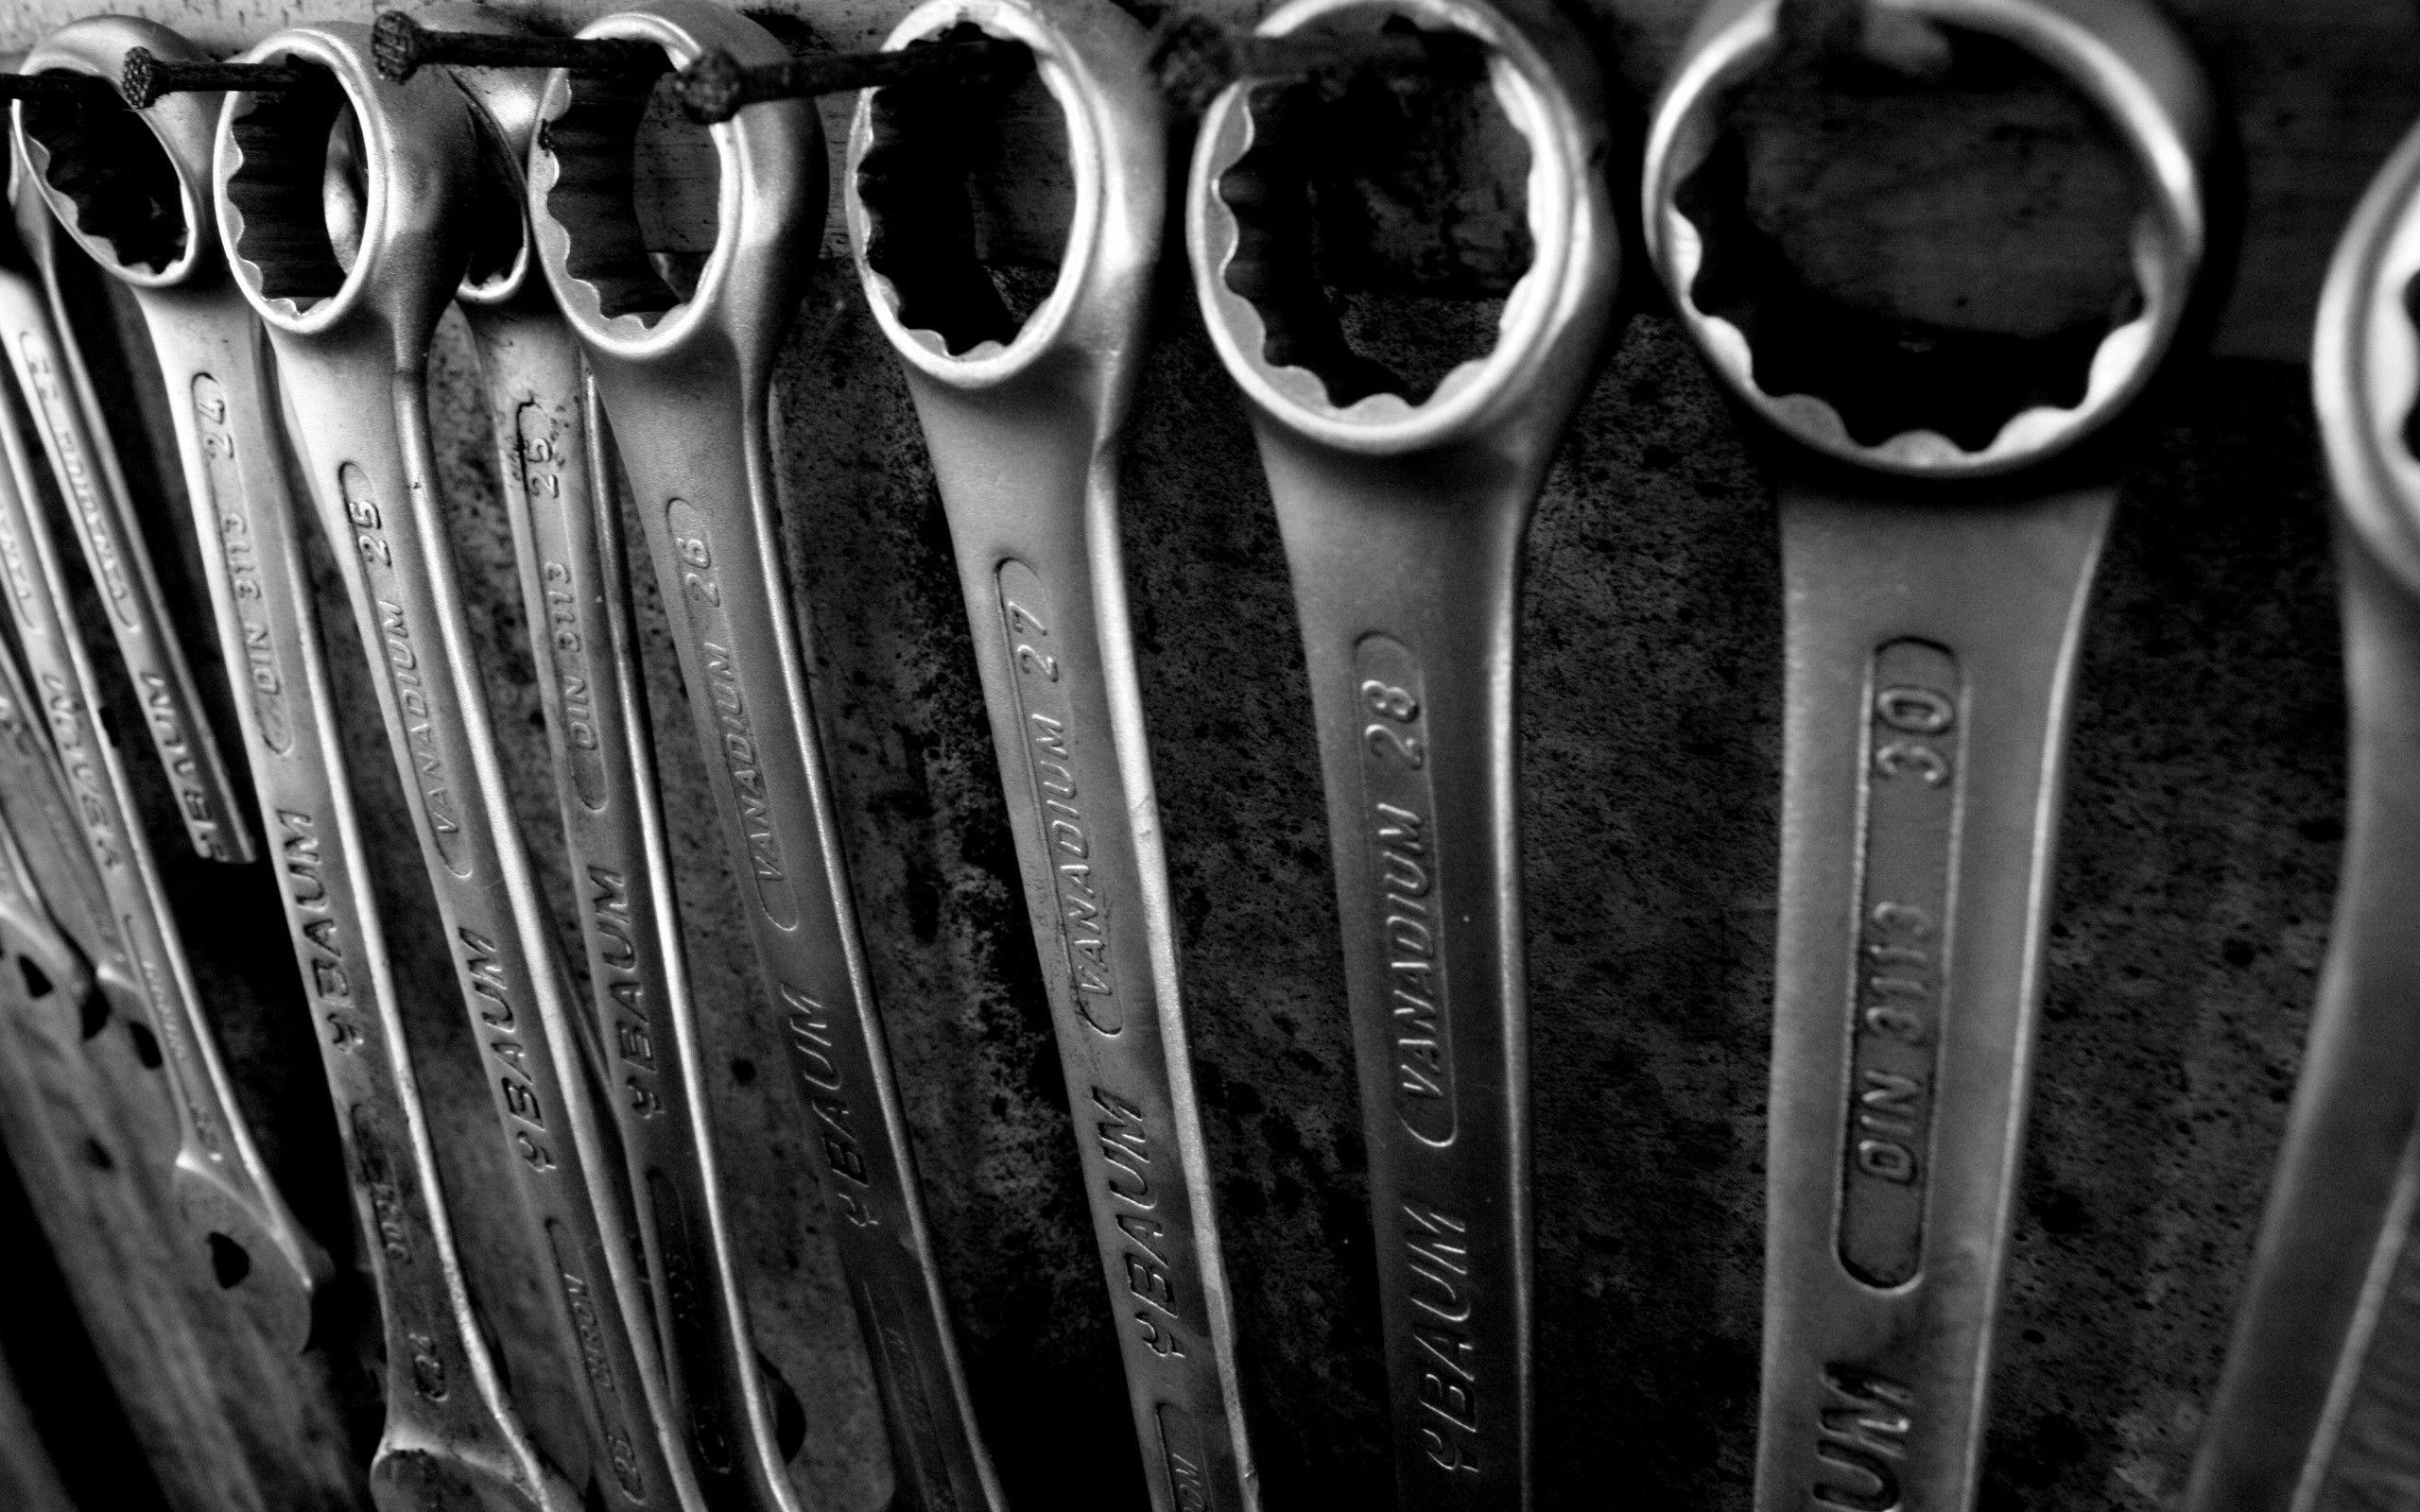 Download the Baum Wrenches Wallpaper, Baum Wrenches iPhone Wallpaper